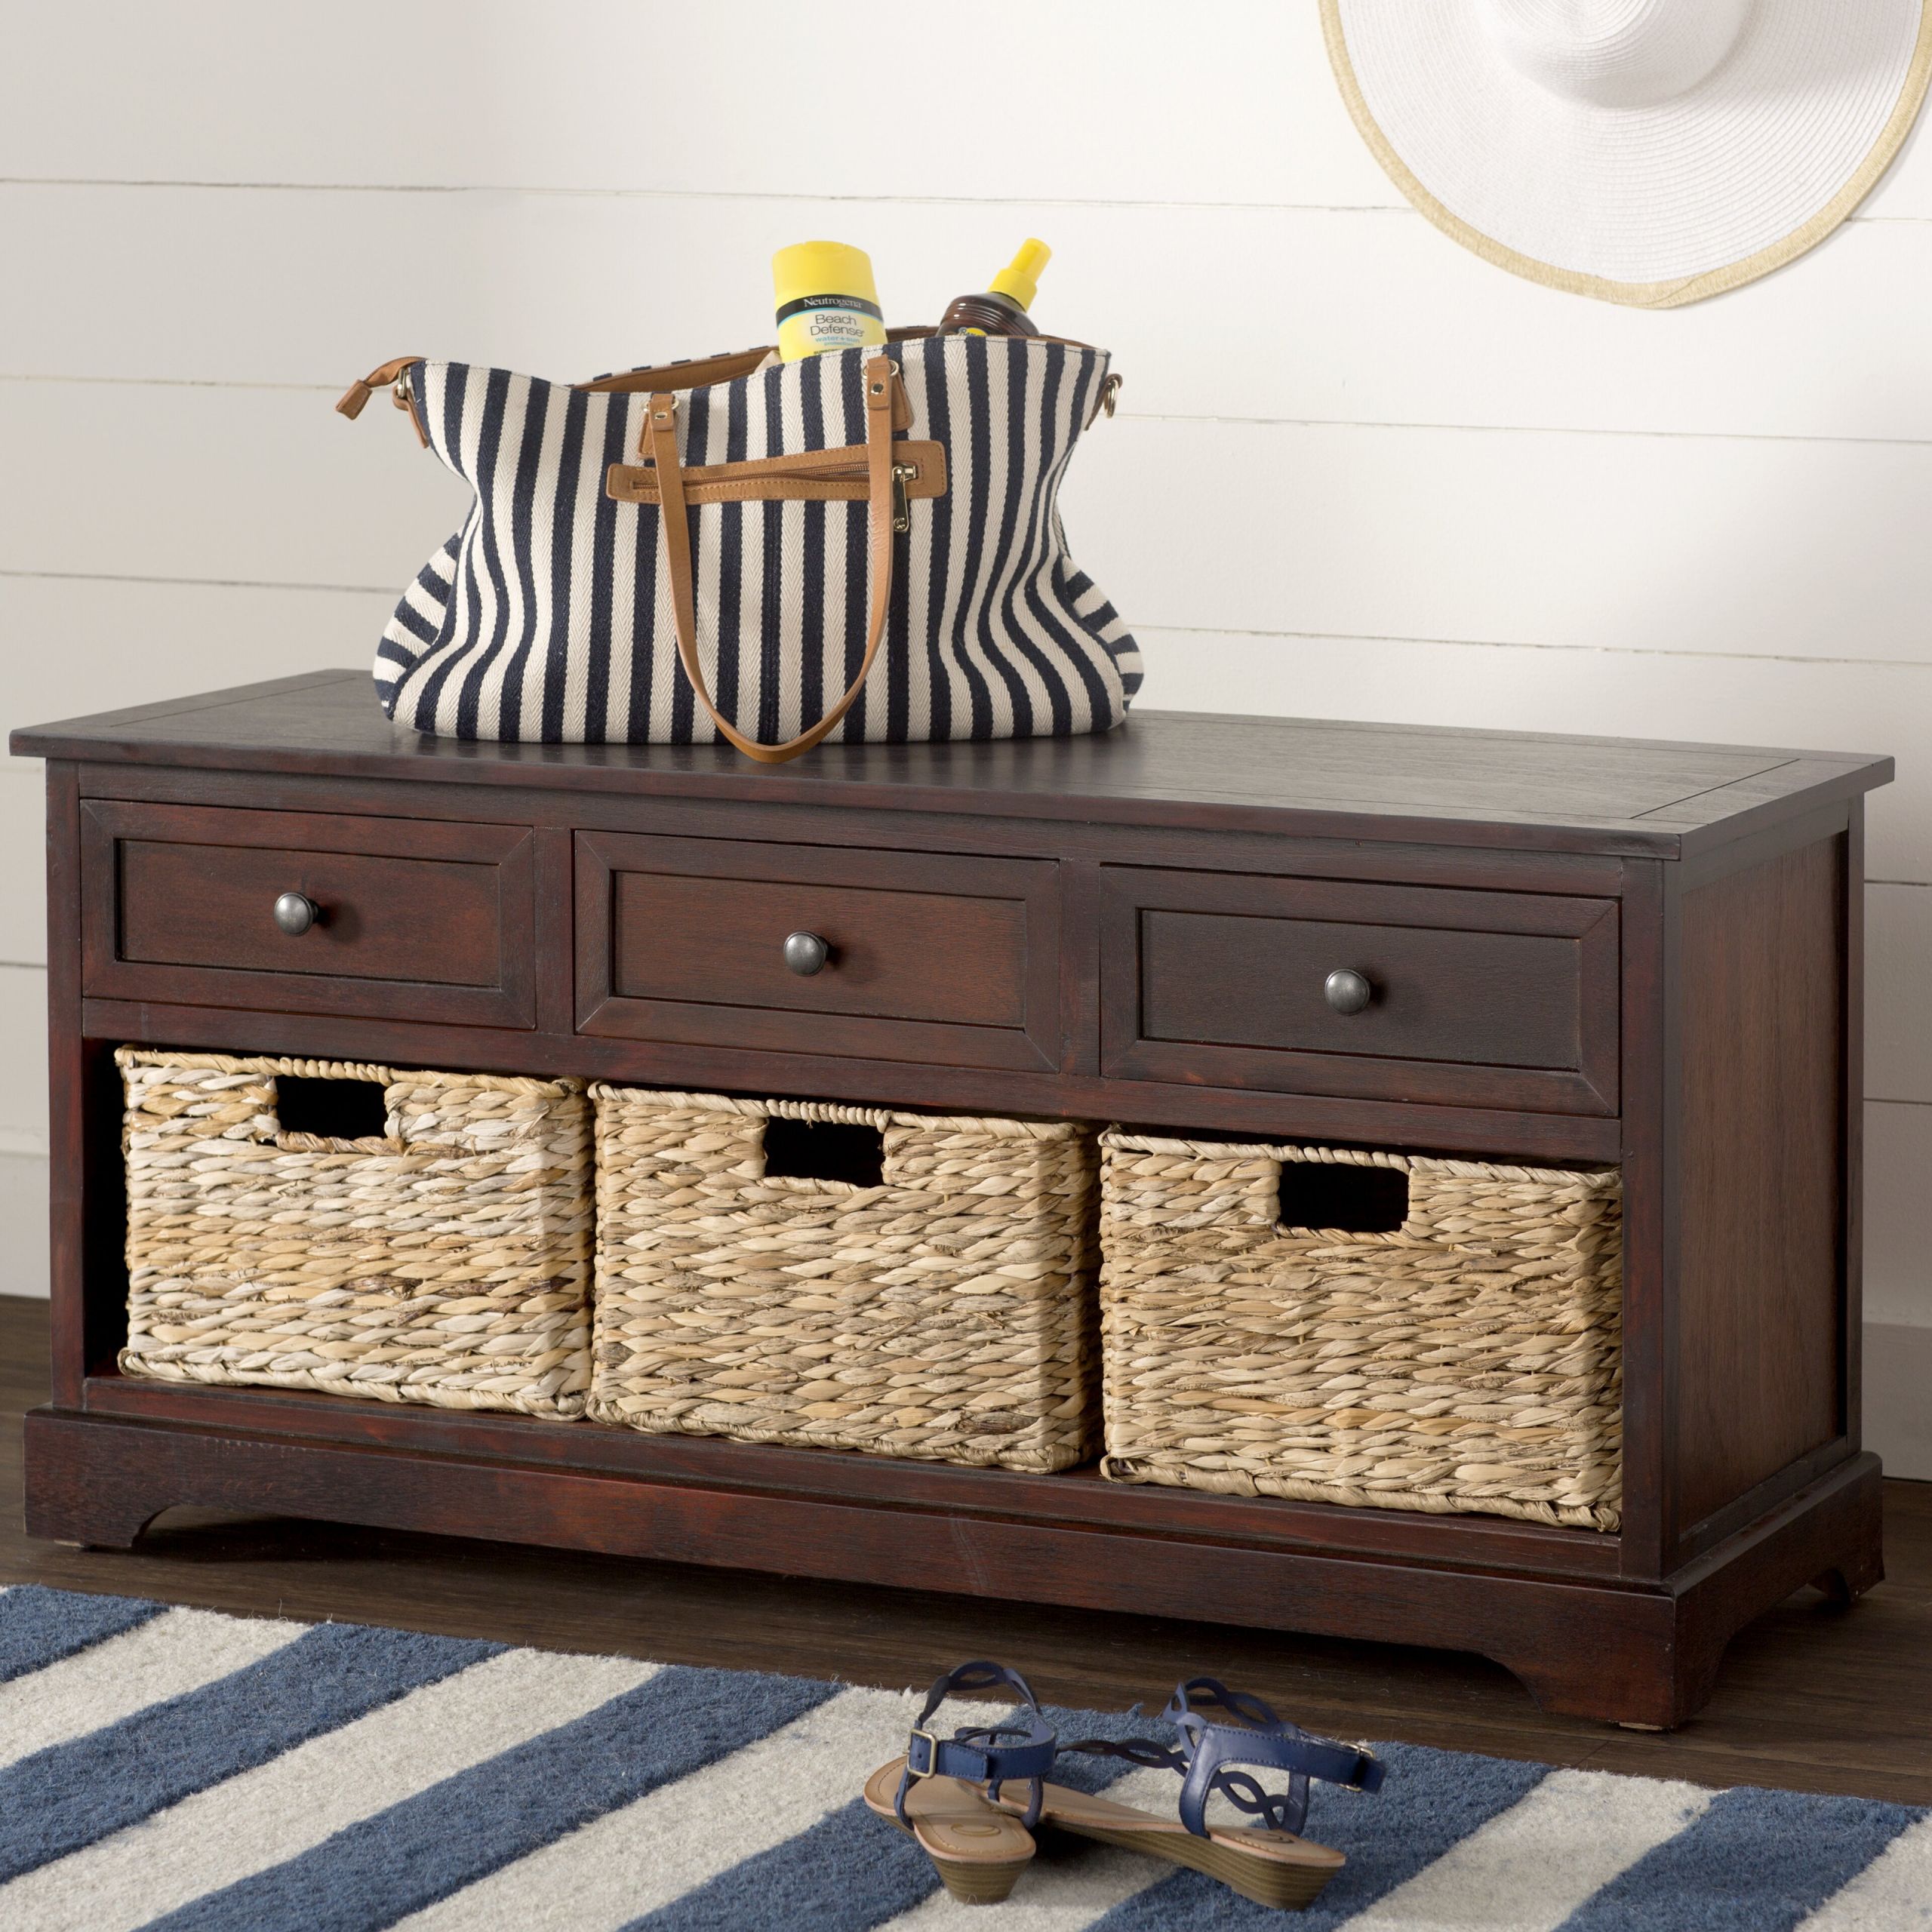 Bench For Entryway With Storage
 Breakwater Bay Lady Lake Storage Entryway Bench & Reviews